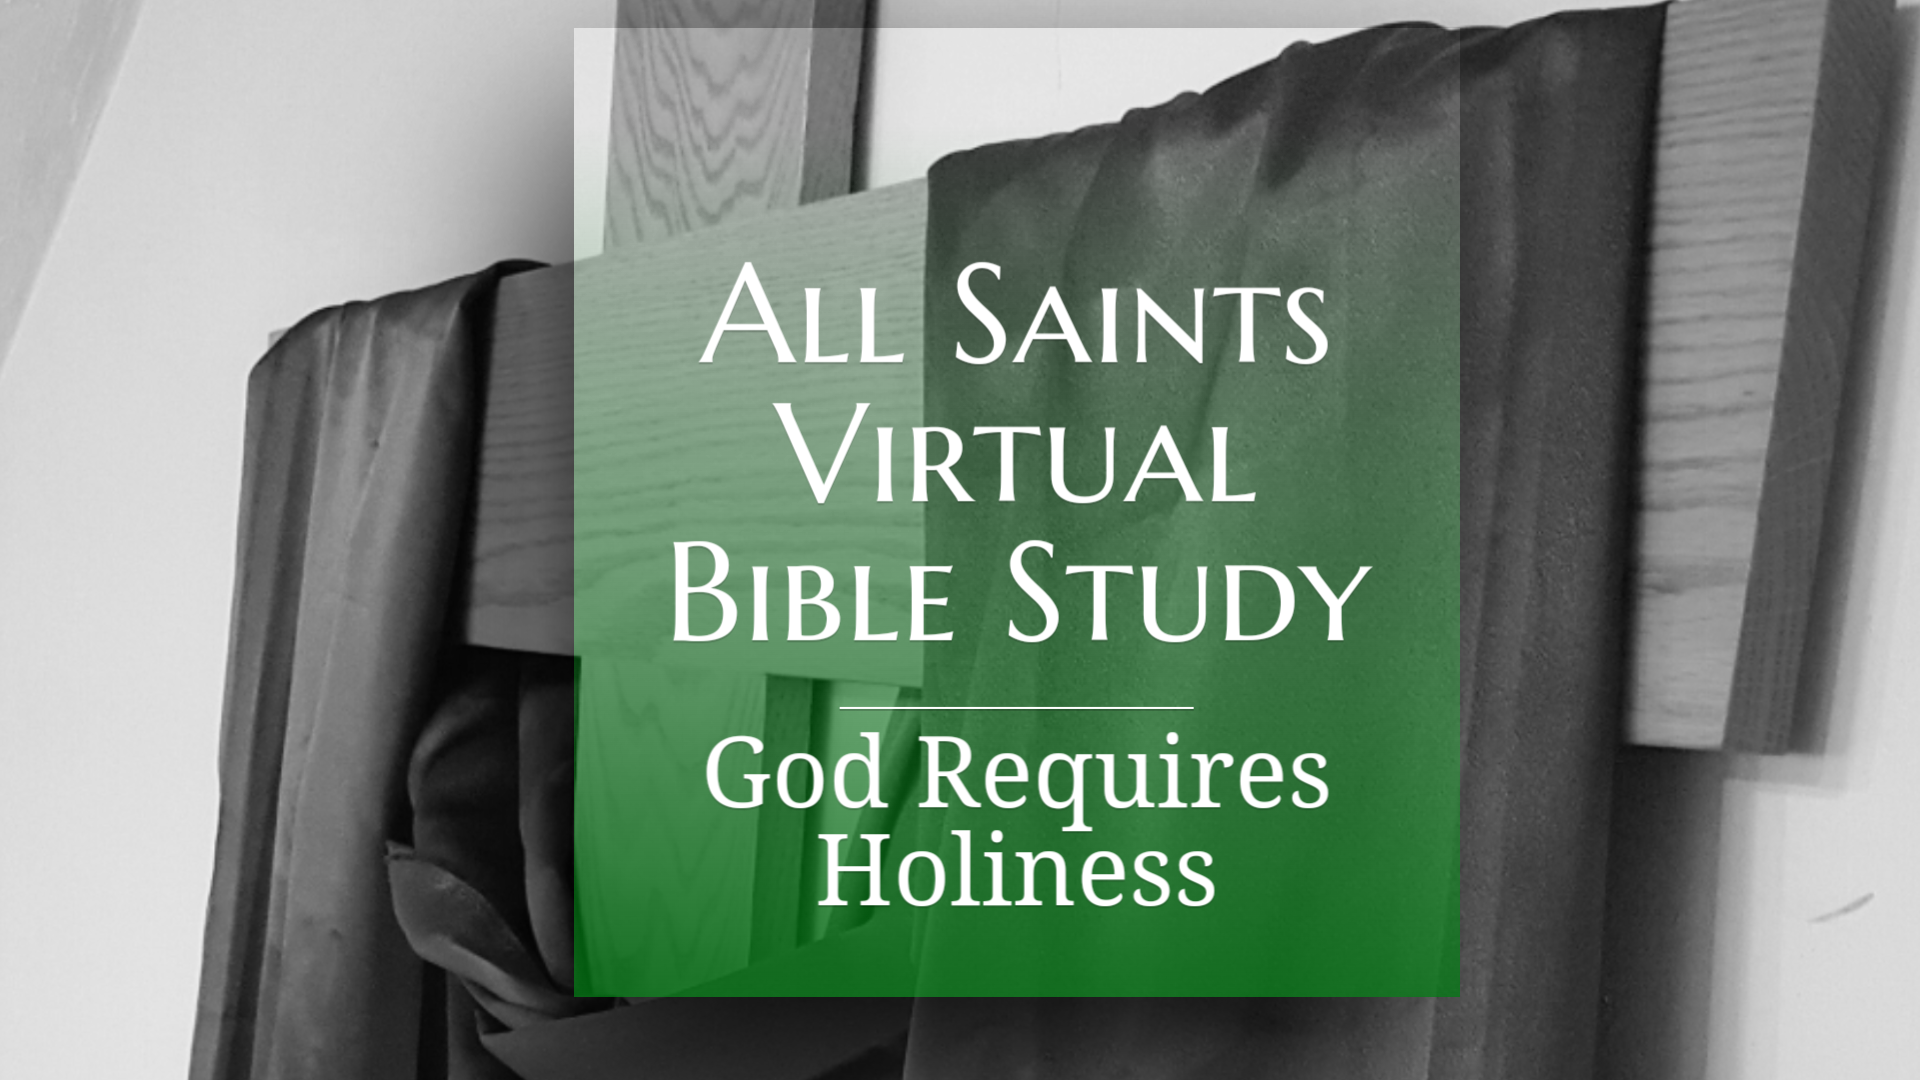 All Saints Virtual Bible Study - God Requires Holiness